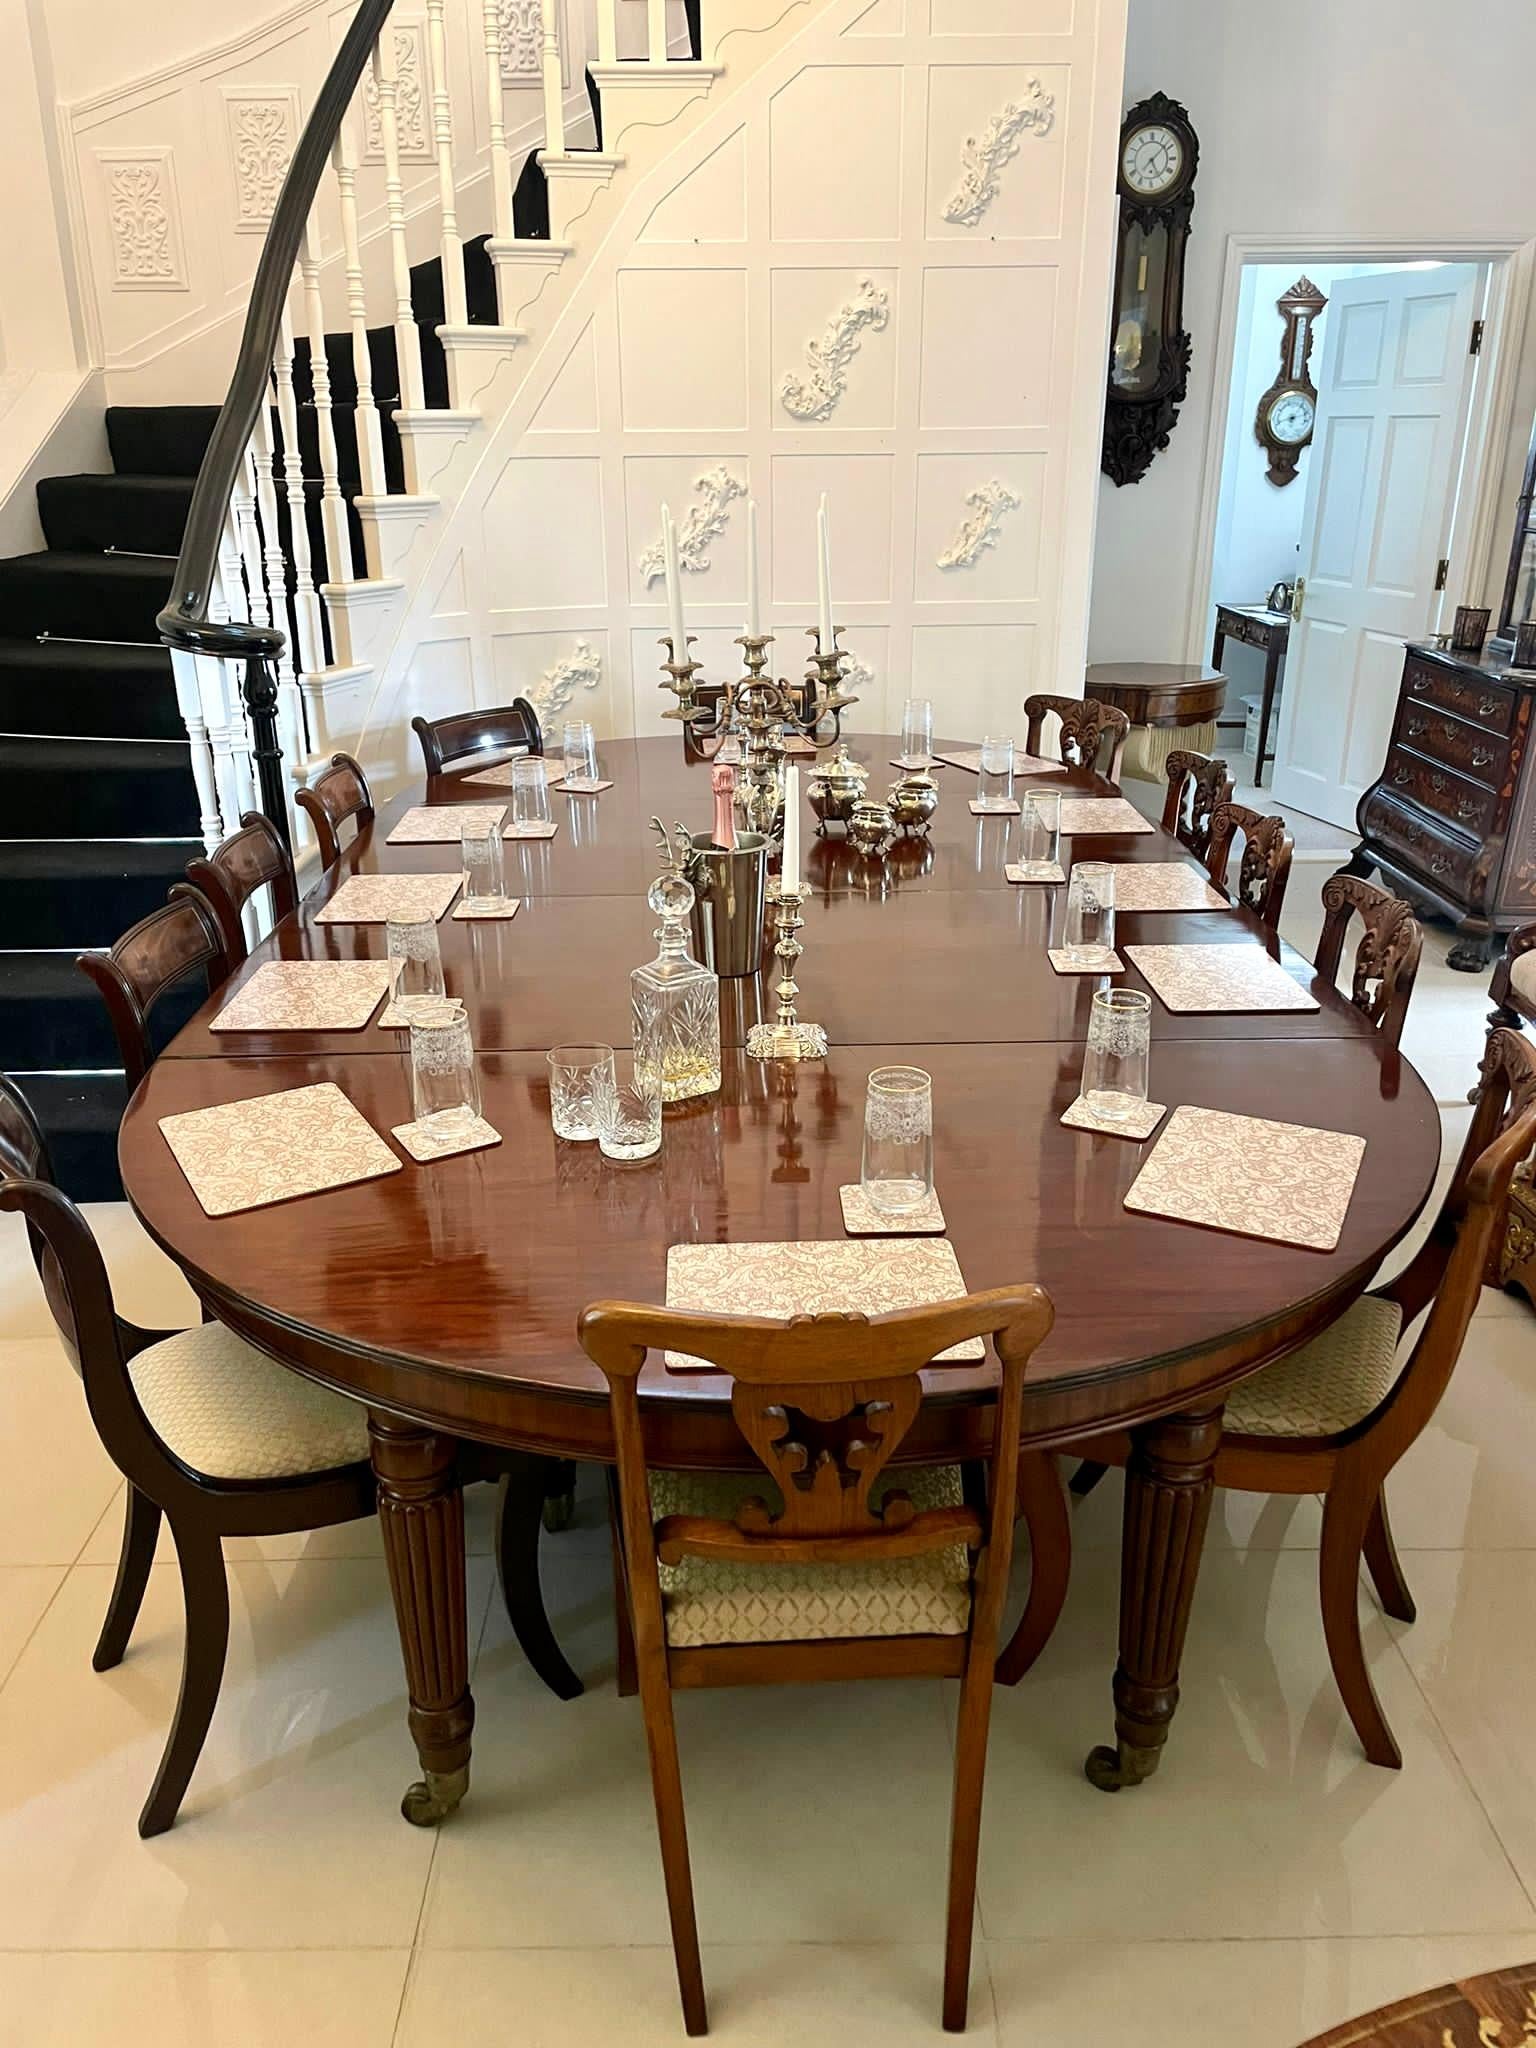 12 person round dining table